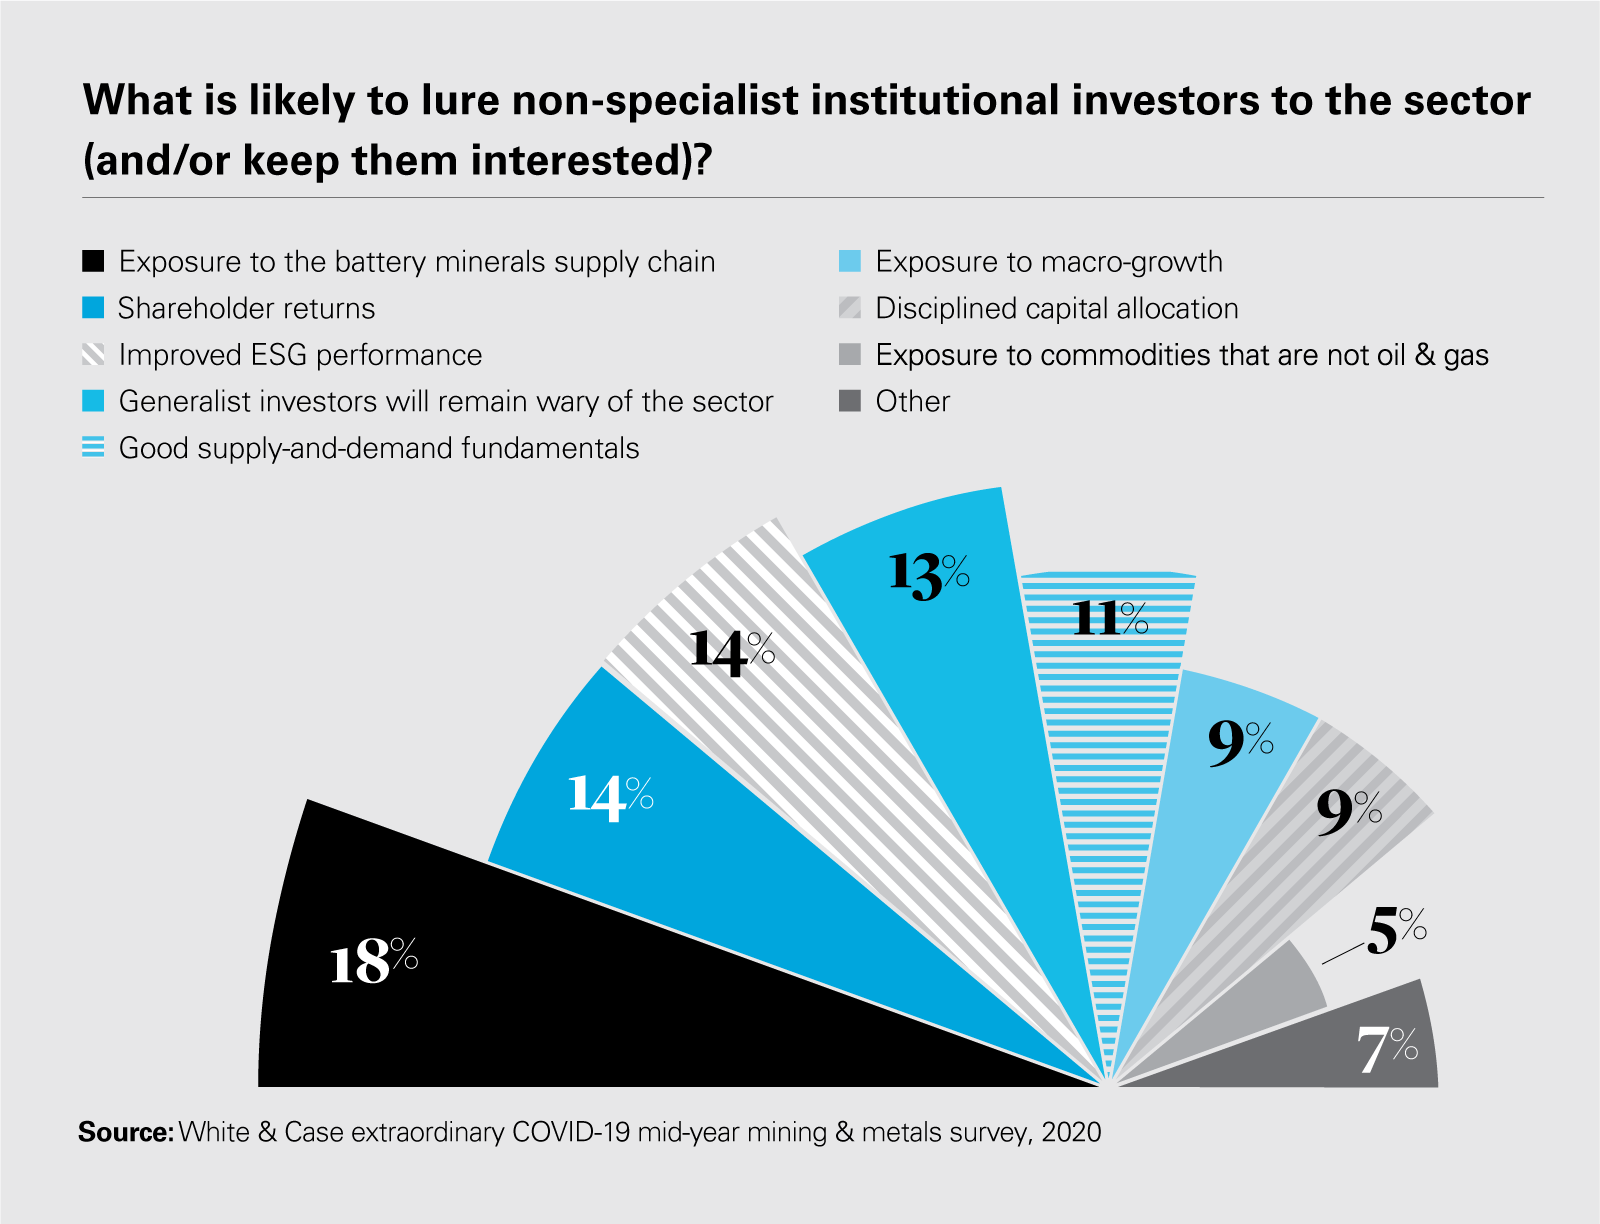 What is likely to lure non-specialist institutional investors to the sector (and/or keep them interested)?